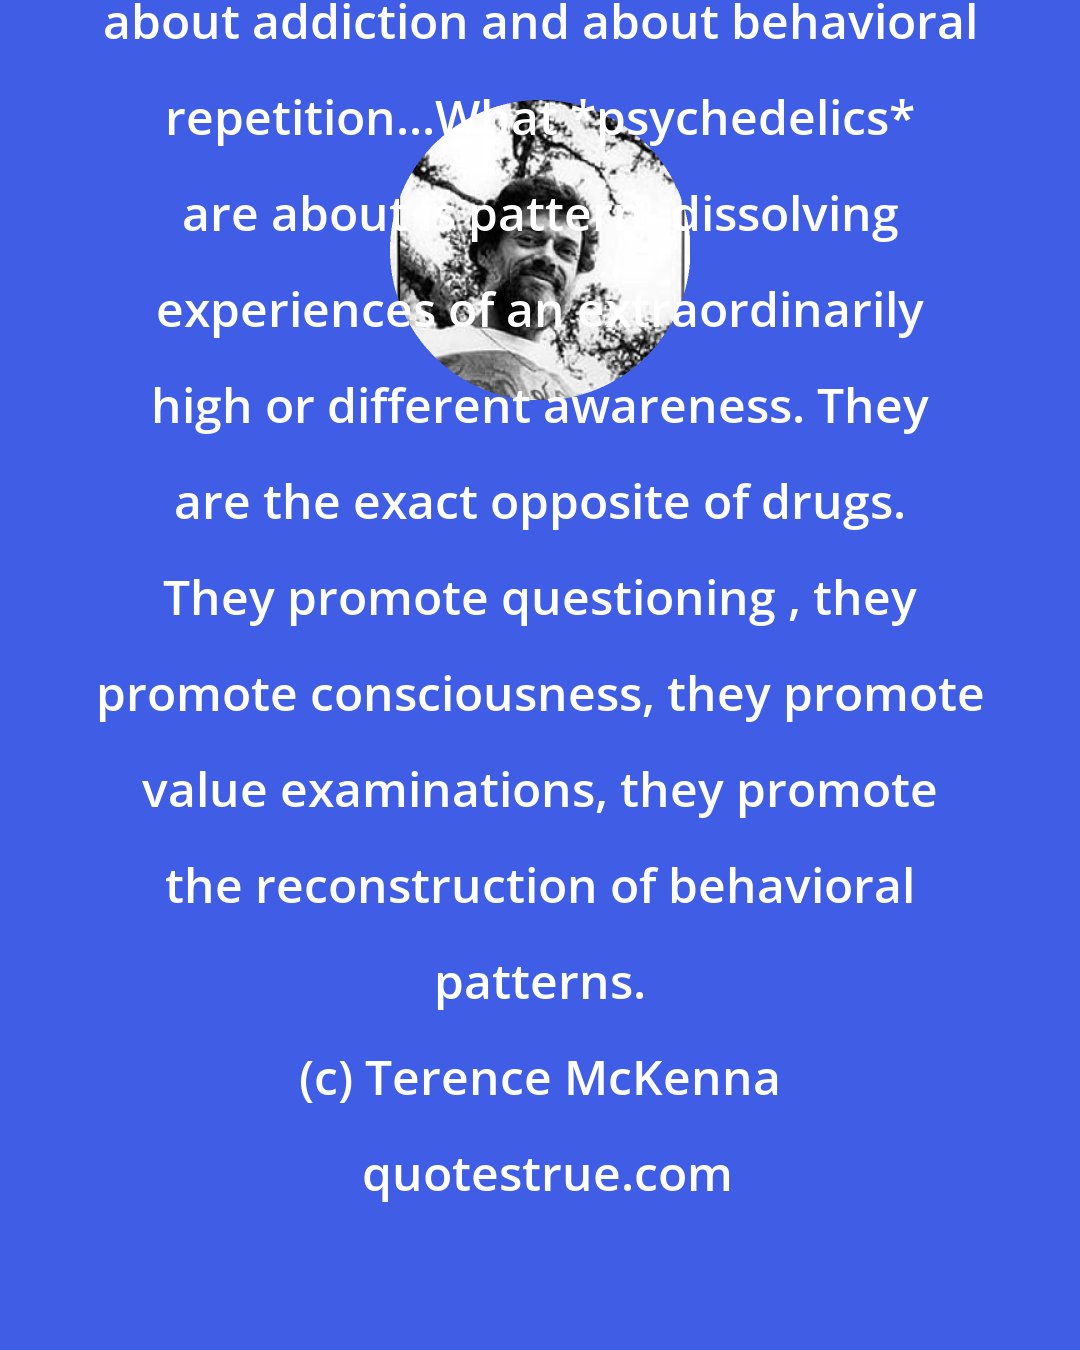 Terence McKenna: Drugs are about dulling perception, about addiction and about behavioral repetition...What *psychedelics* are about is pattern- dissolving experiences of an extraordinarily high or different awareness. They are the exact opposite of drugs. They promote questioning , they promote consciousness, they promote value examinations, they promote the reconstruction of behavioral patterns.